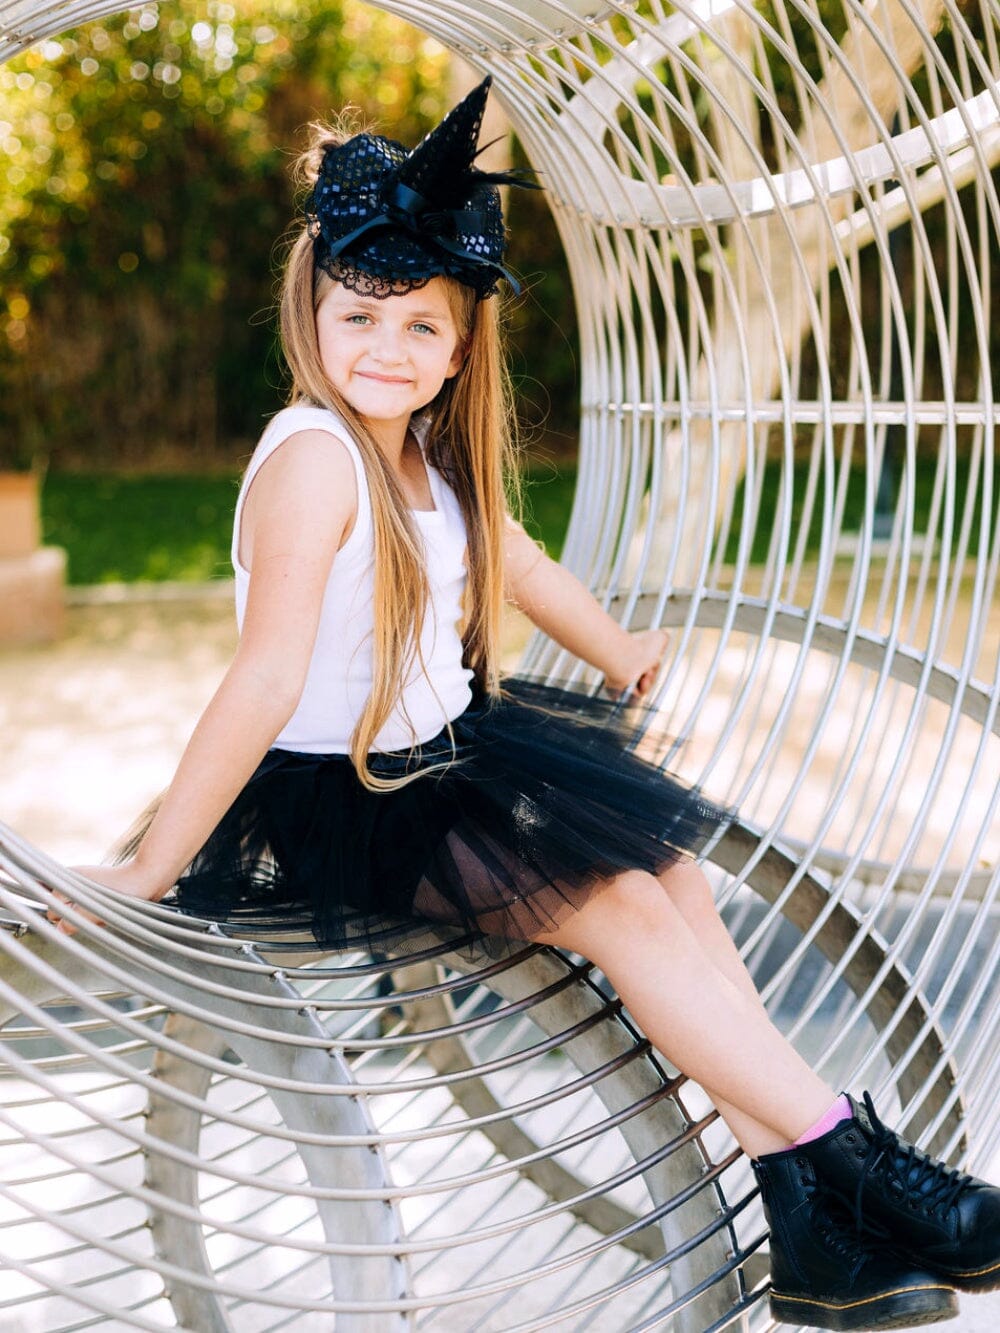 Girls Pixie Black Witch Costume - Complete Kids Costume Set with Pixie Cut Tutu and Hat Headband - Sydney So Sweet